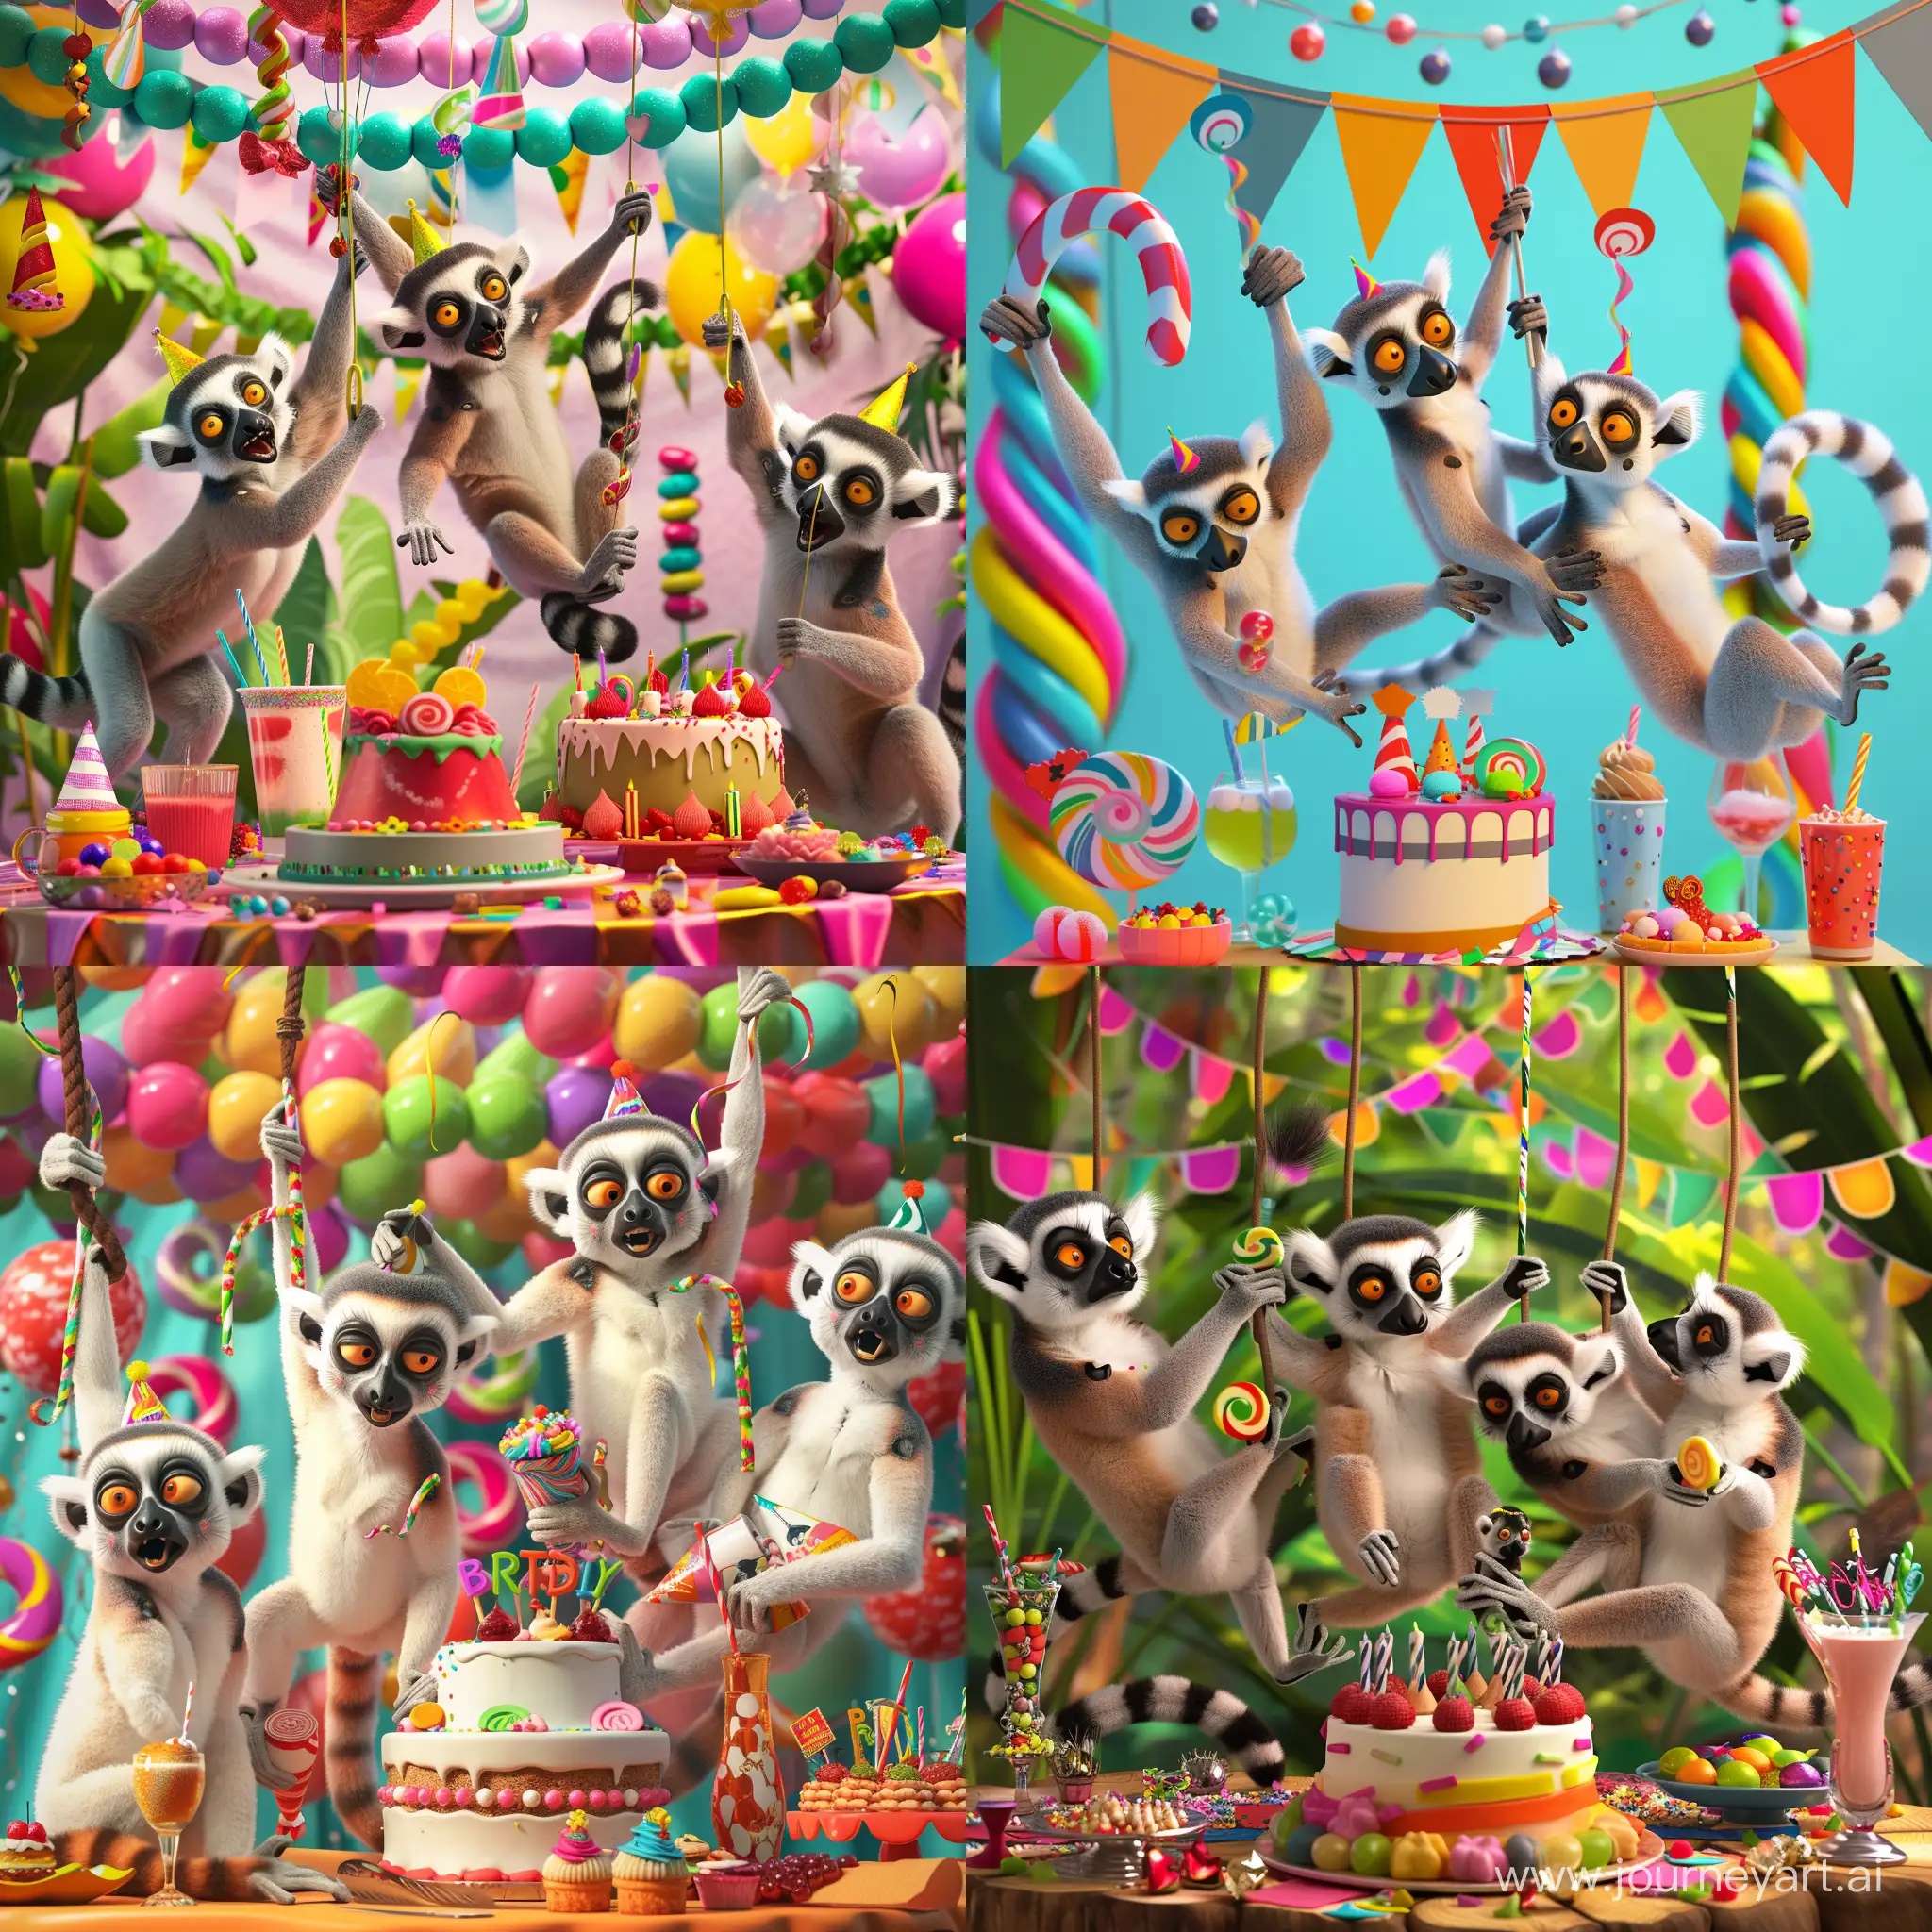 Lemur-Birthday-Bash-Festive-Celebration-with-Cake-Candy-and-Colorful-Decorations